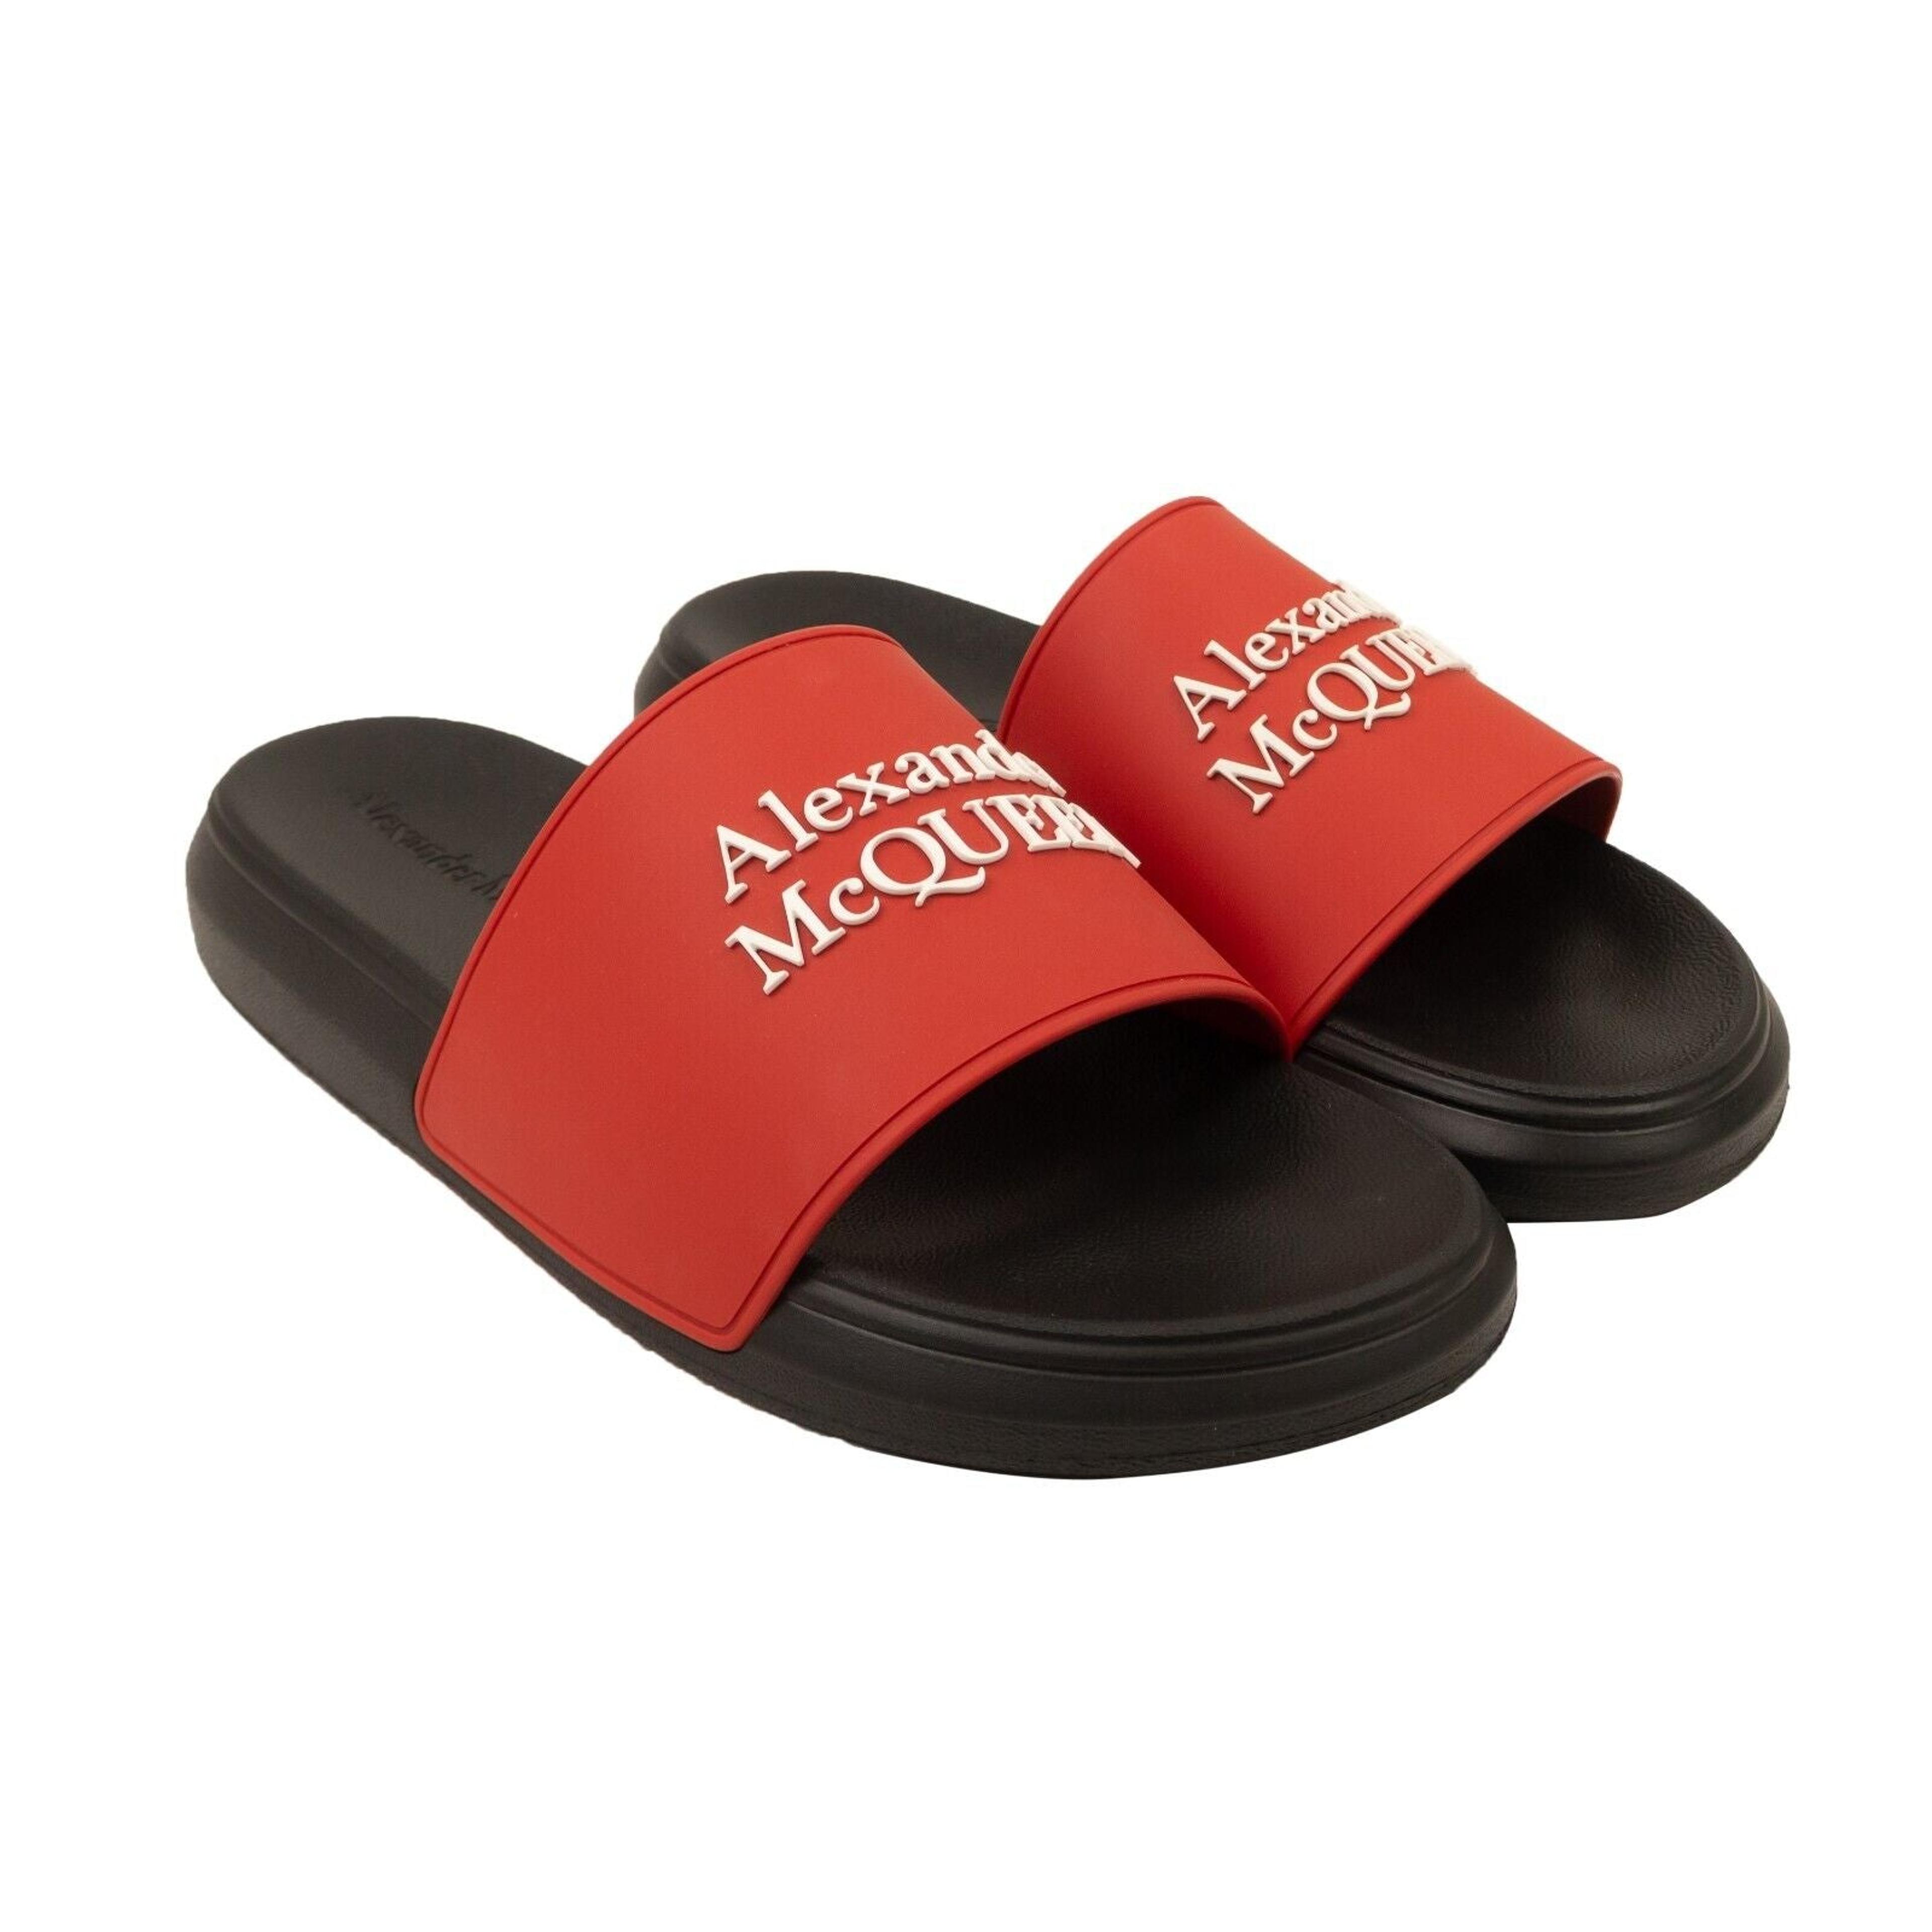 Alternate View 2 of Black And Red Logo Pool Slides